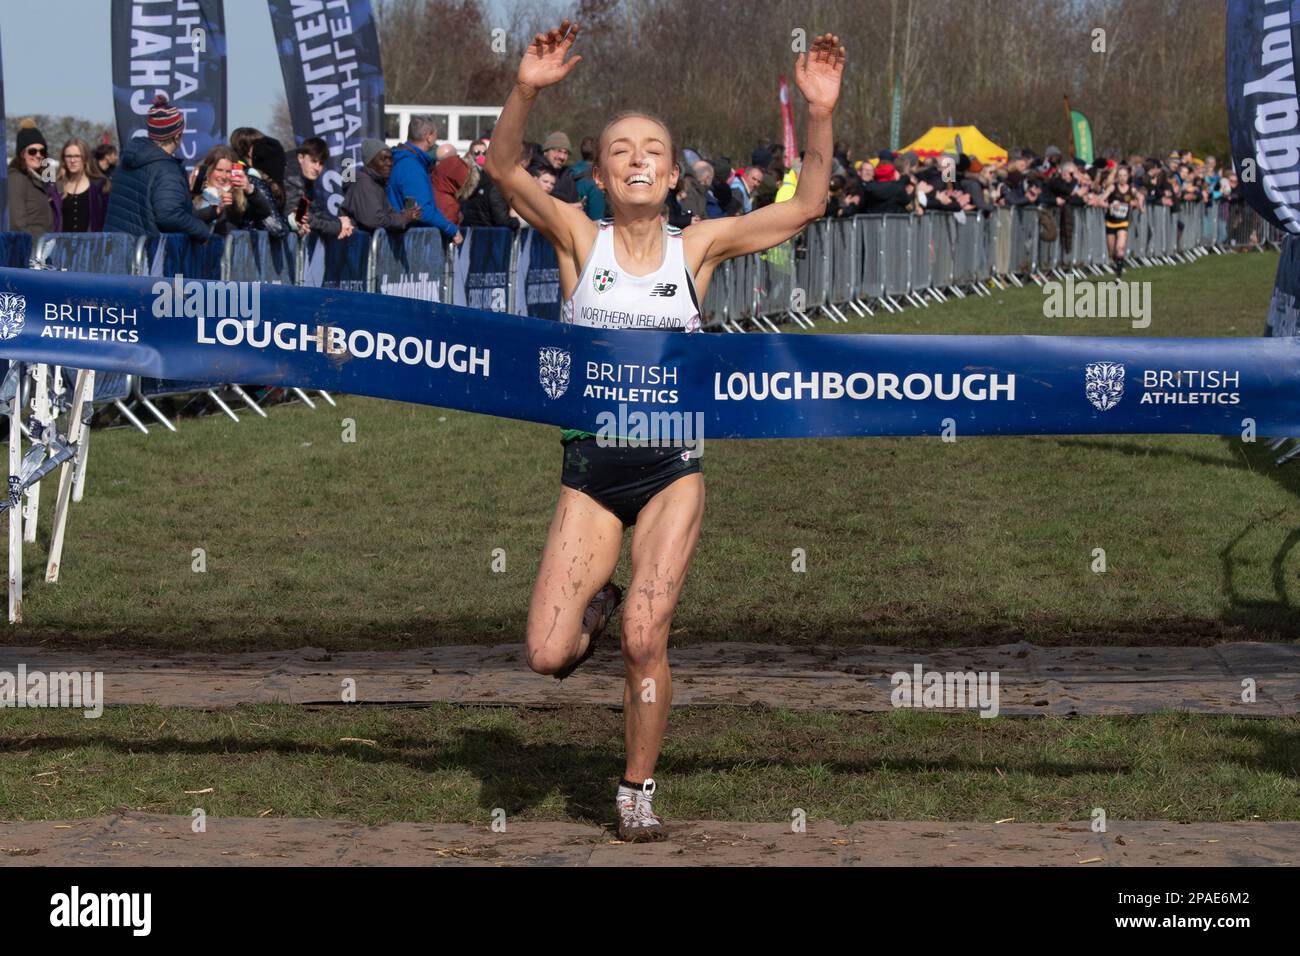 Loughborough, UK. Saturday, 11th March 2023. Sunny. Grace Carson, no. 1119, representing Northern Ireland inter county team, wins senior women, UK Counties Athletic Union 2023 UK inter counties cross country championships and British athletics Cross Challenge, the 5th stage, final race at Prestwold Hall, Loughborough. © Yoko Shelley Credit: Yoko Shelley/Alamy Live News Stock Photo